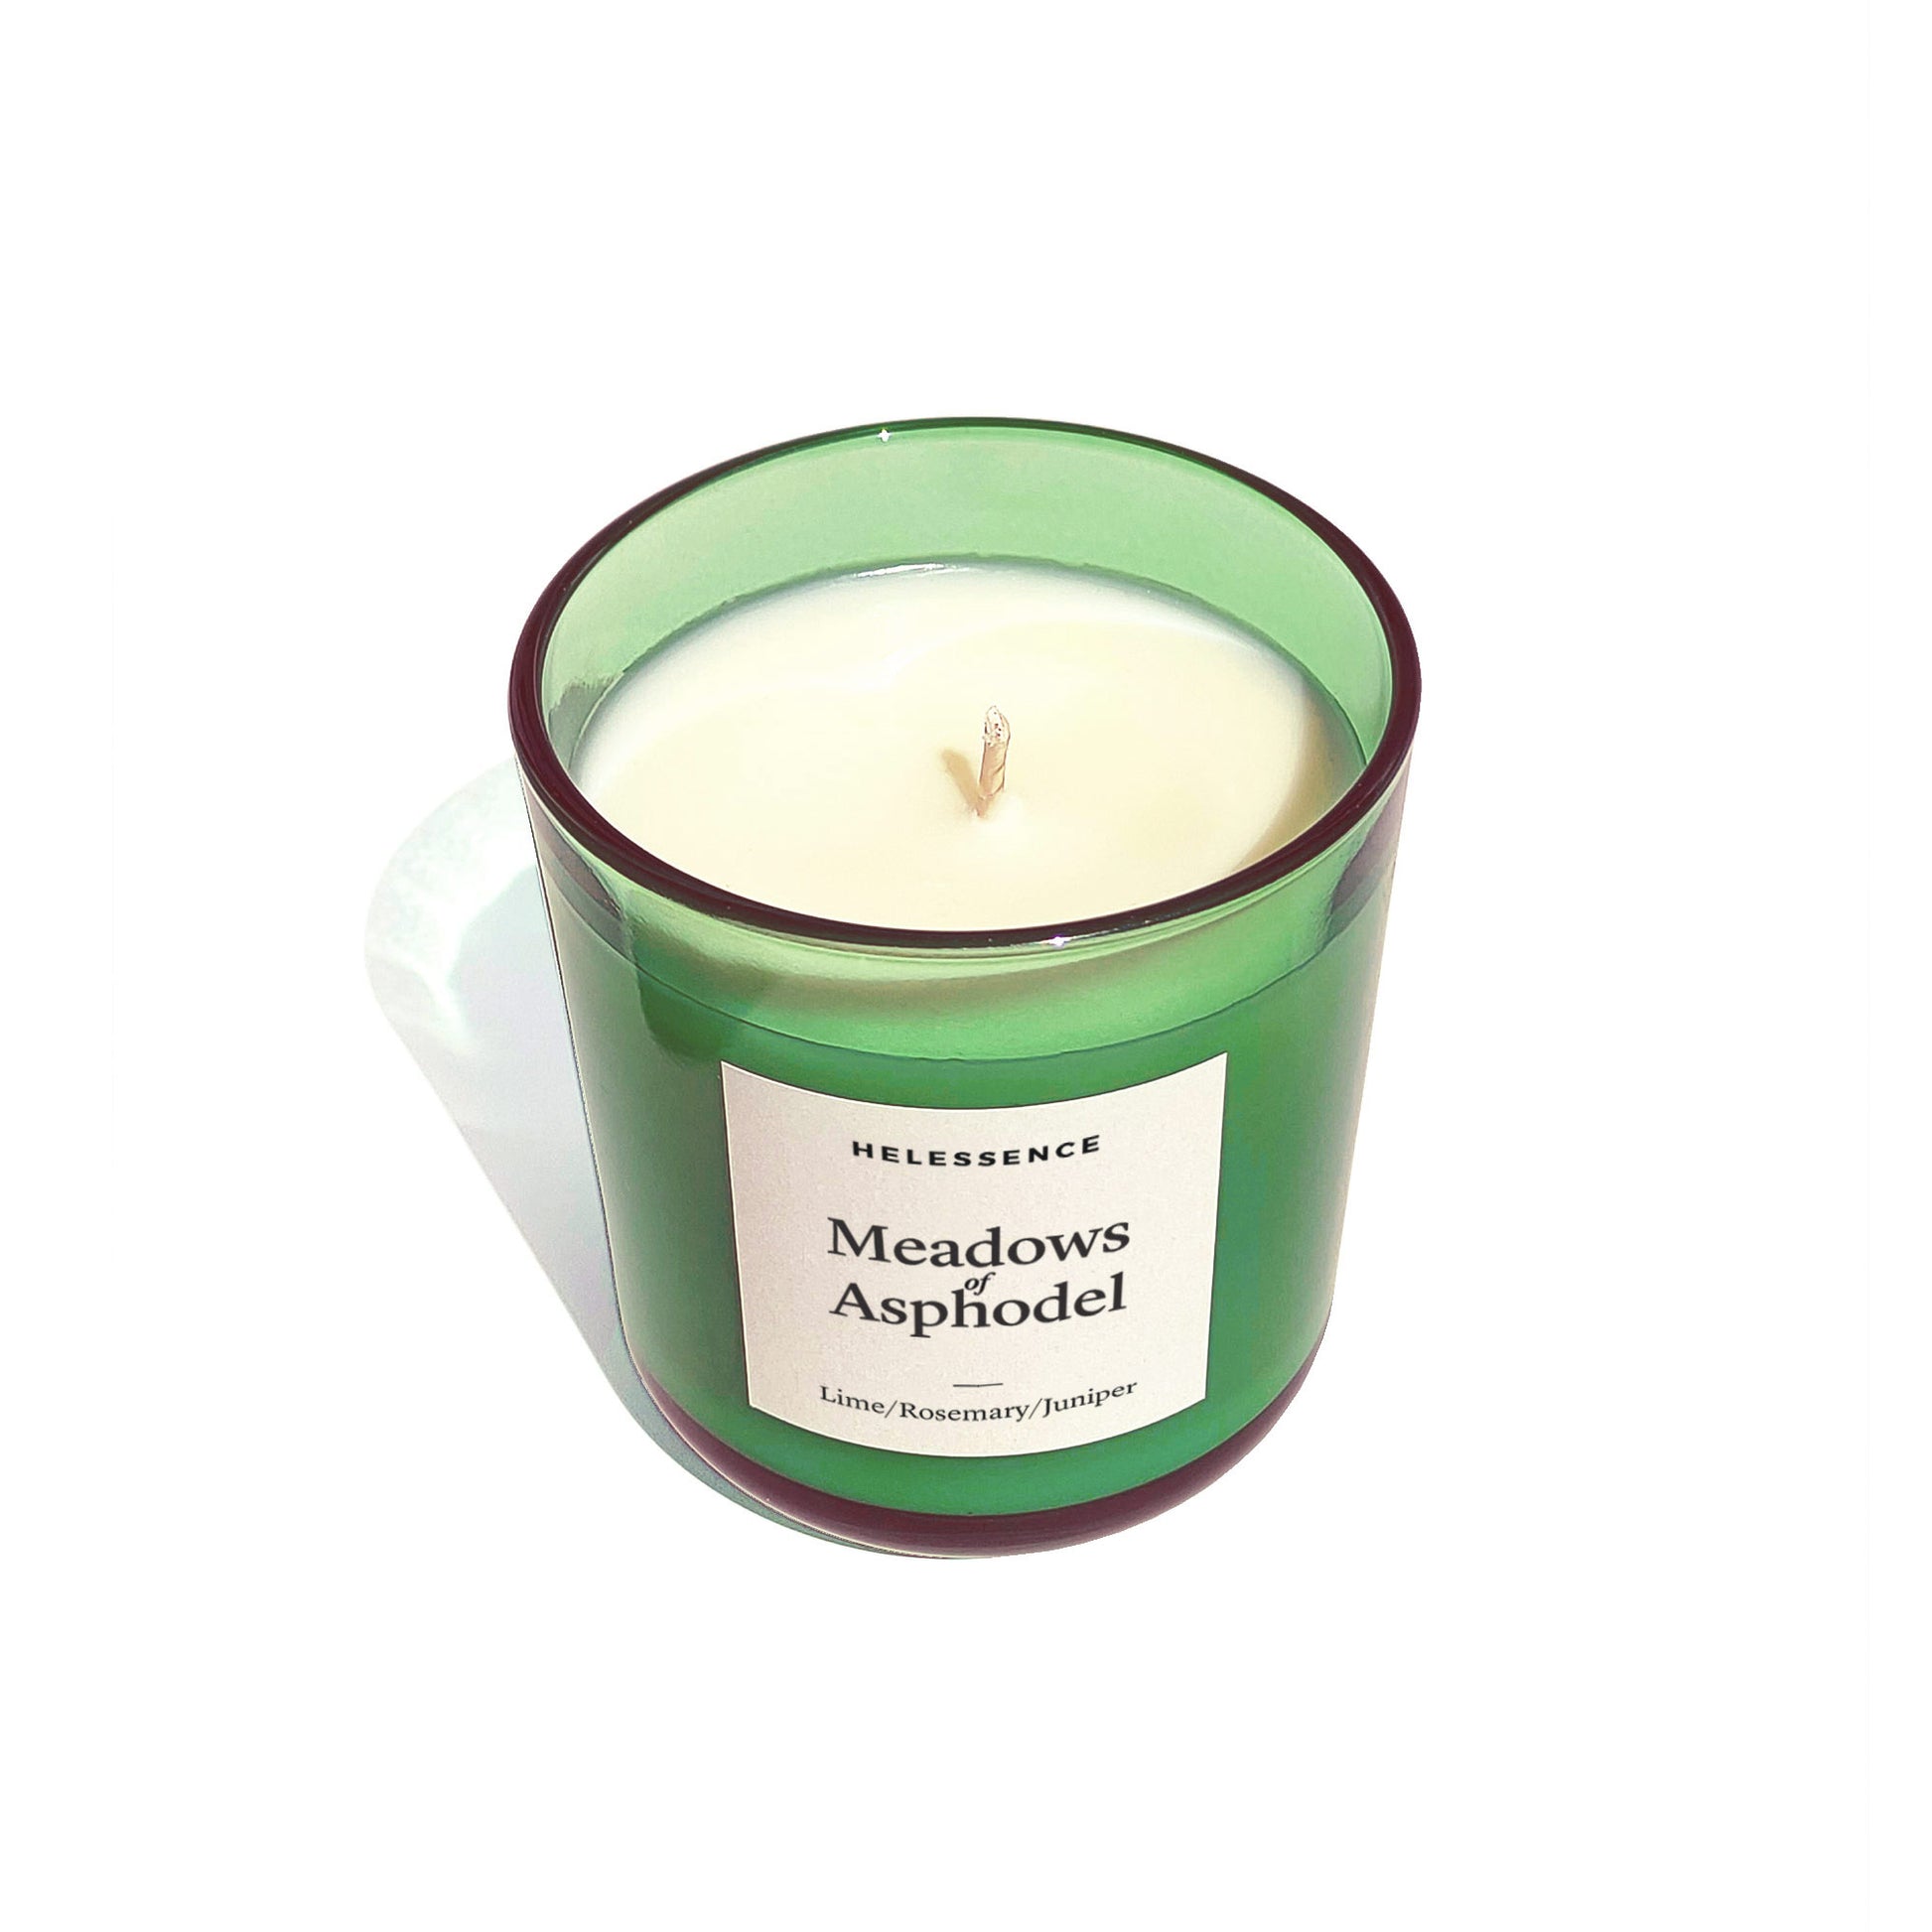 Meadows of Asphodel Scented Candle